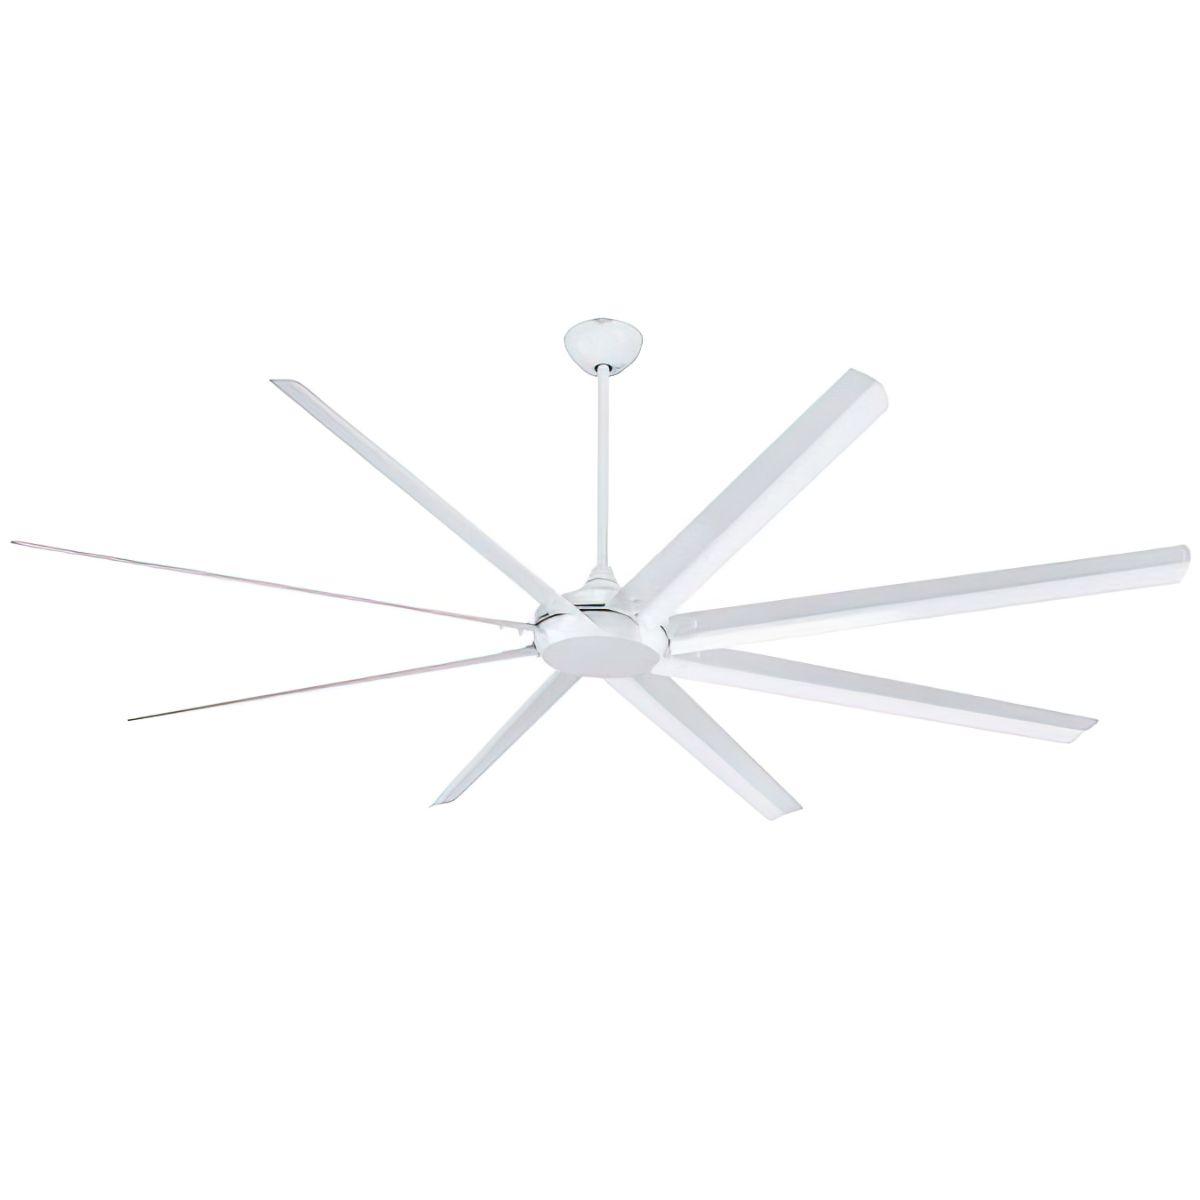 Widespan 100 Inch DC Industrial Windmill Outdoor Ceiling Fan With Remote, White Finish, 8 Blades - Bees Lighting